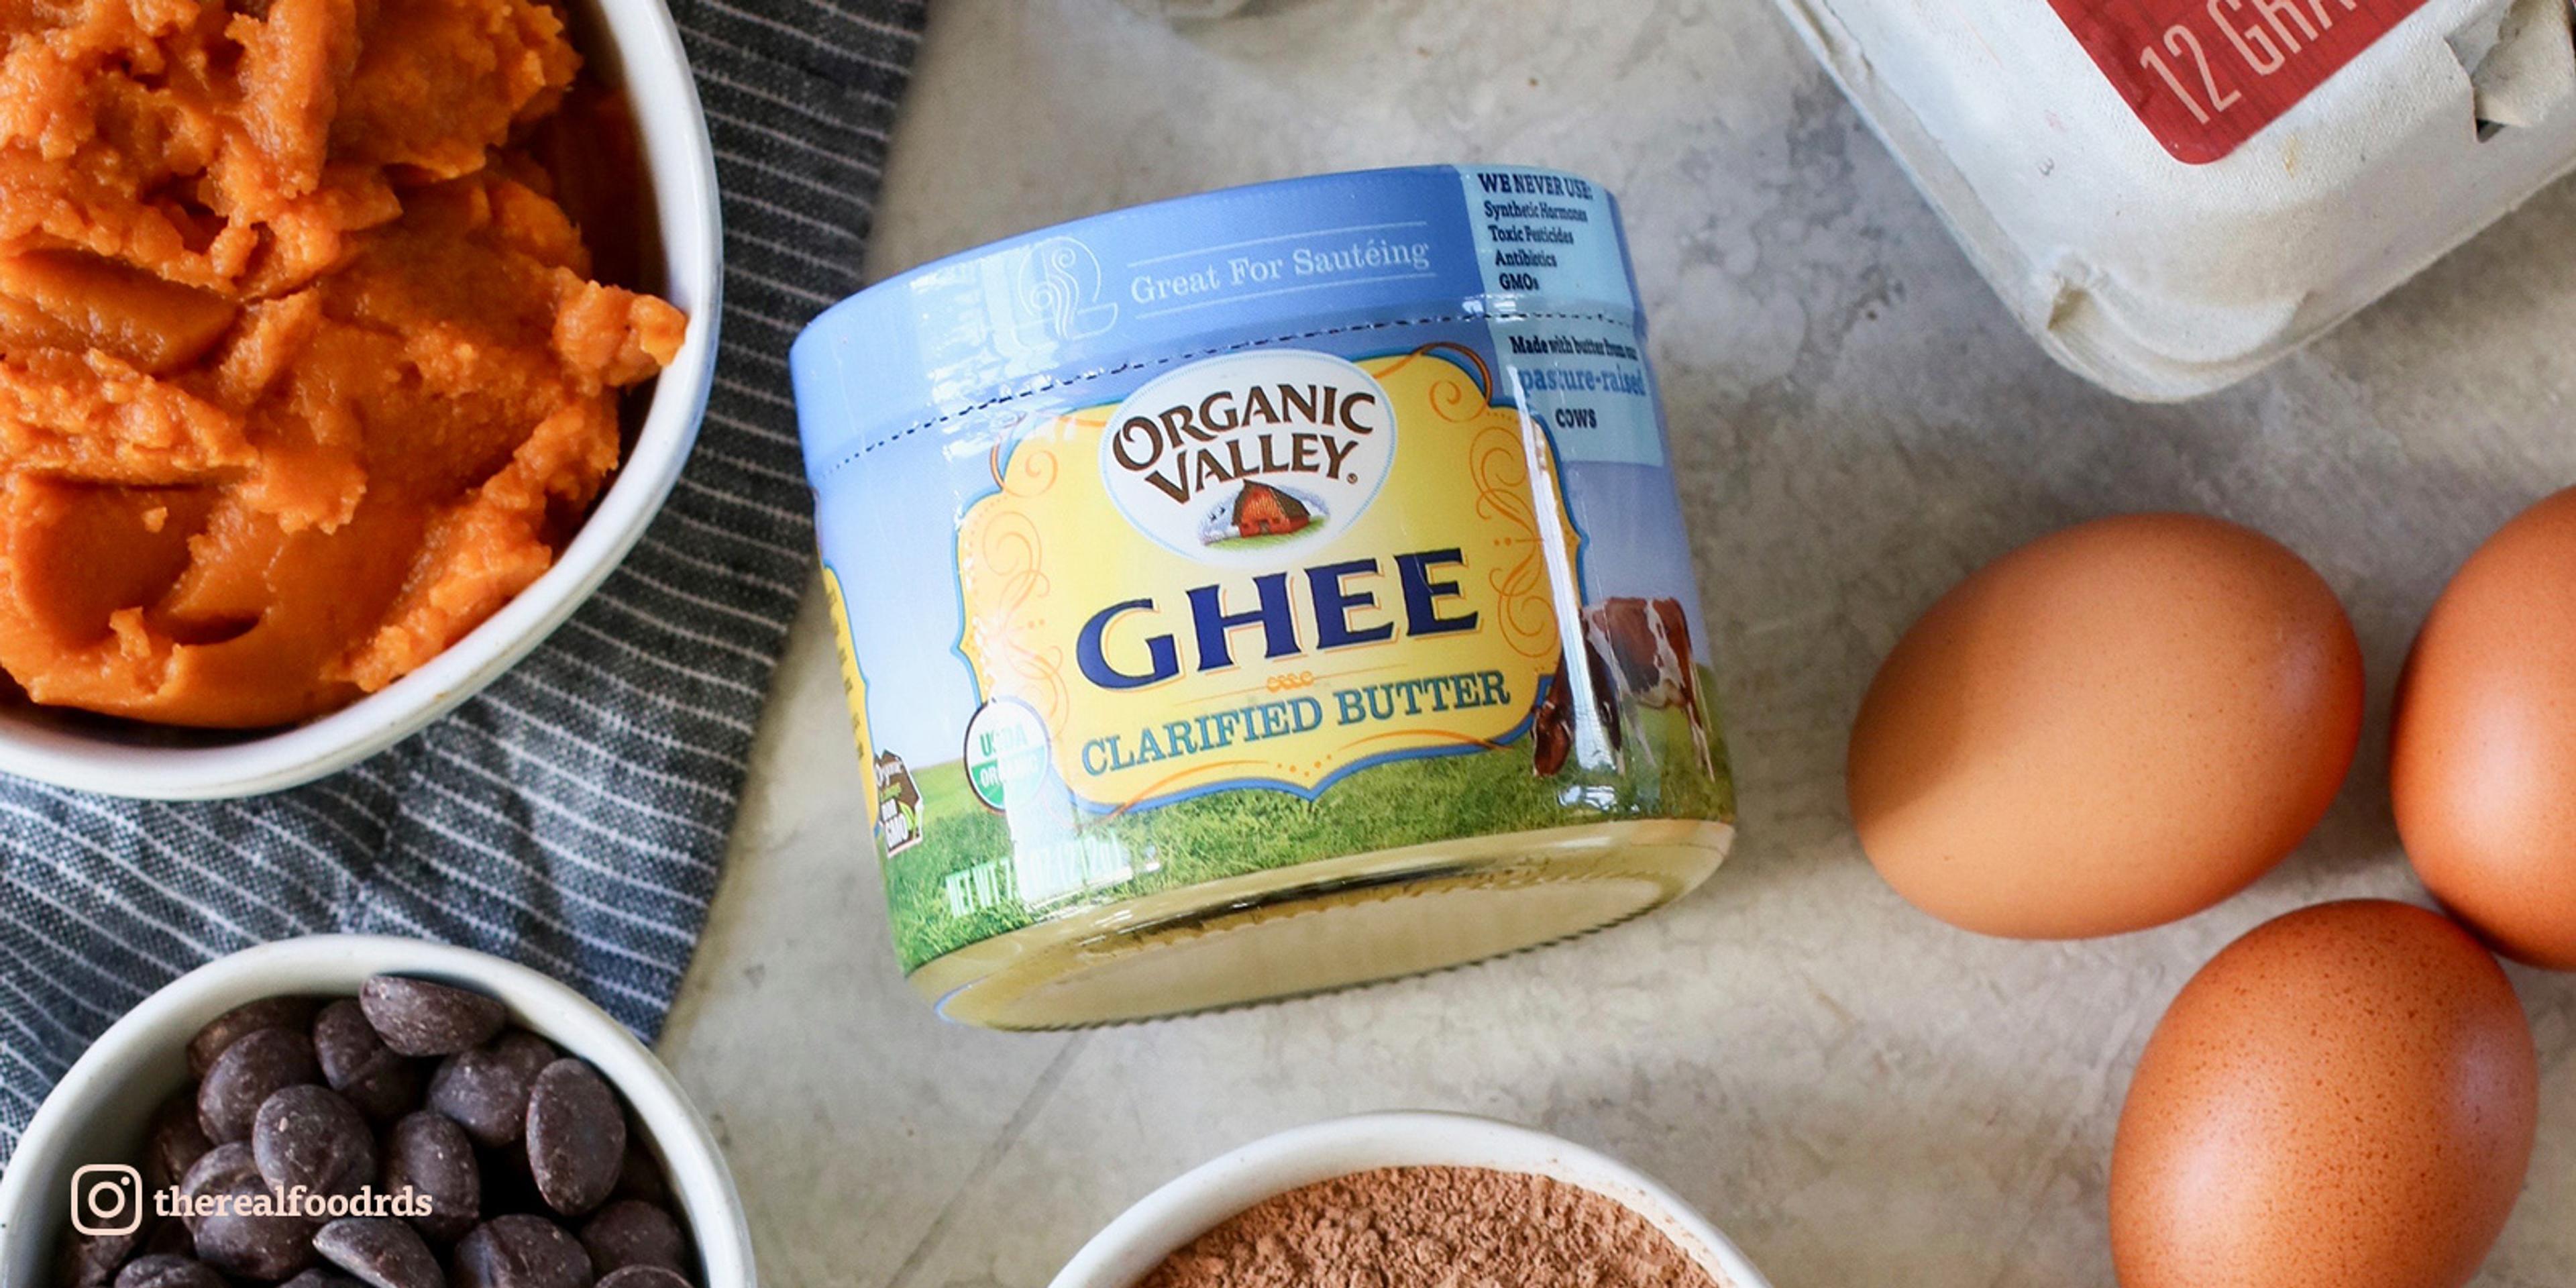 Organic Valley ghee used alongside other ingredients, including organic eggs. Photo by The Real Food Dietitians.